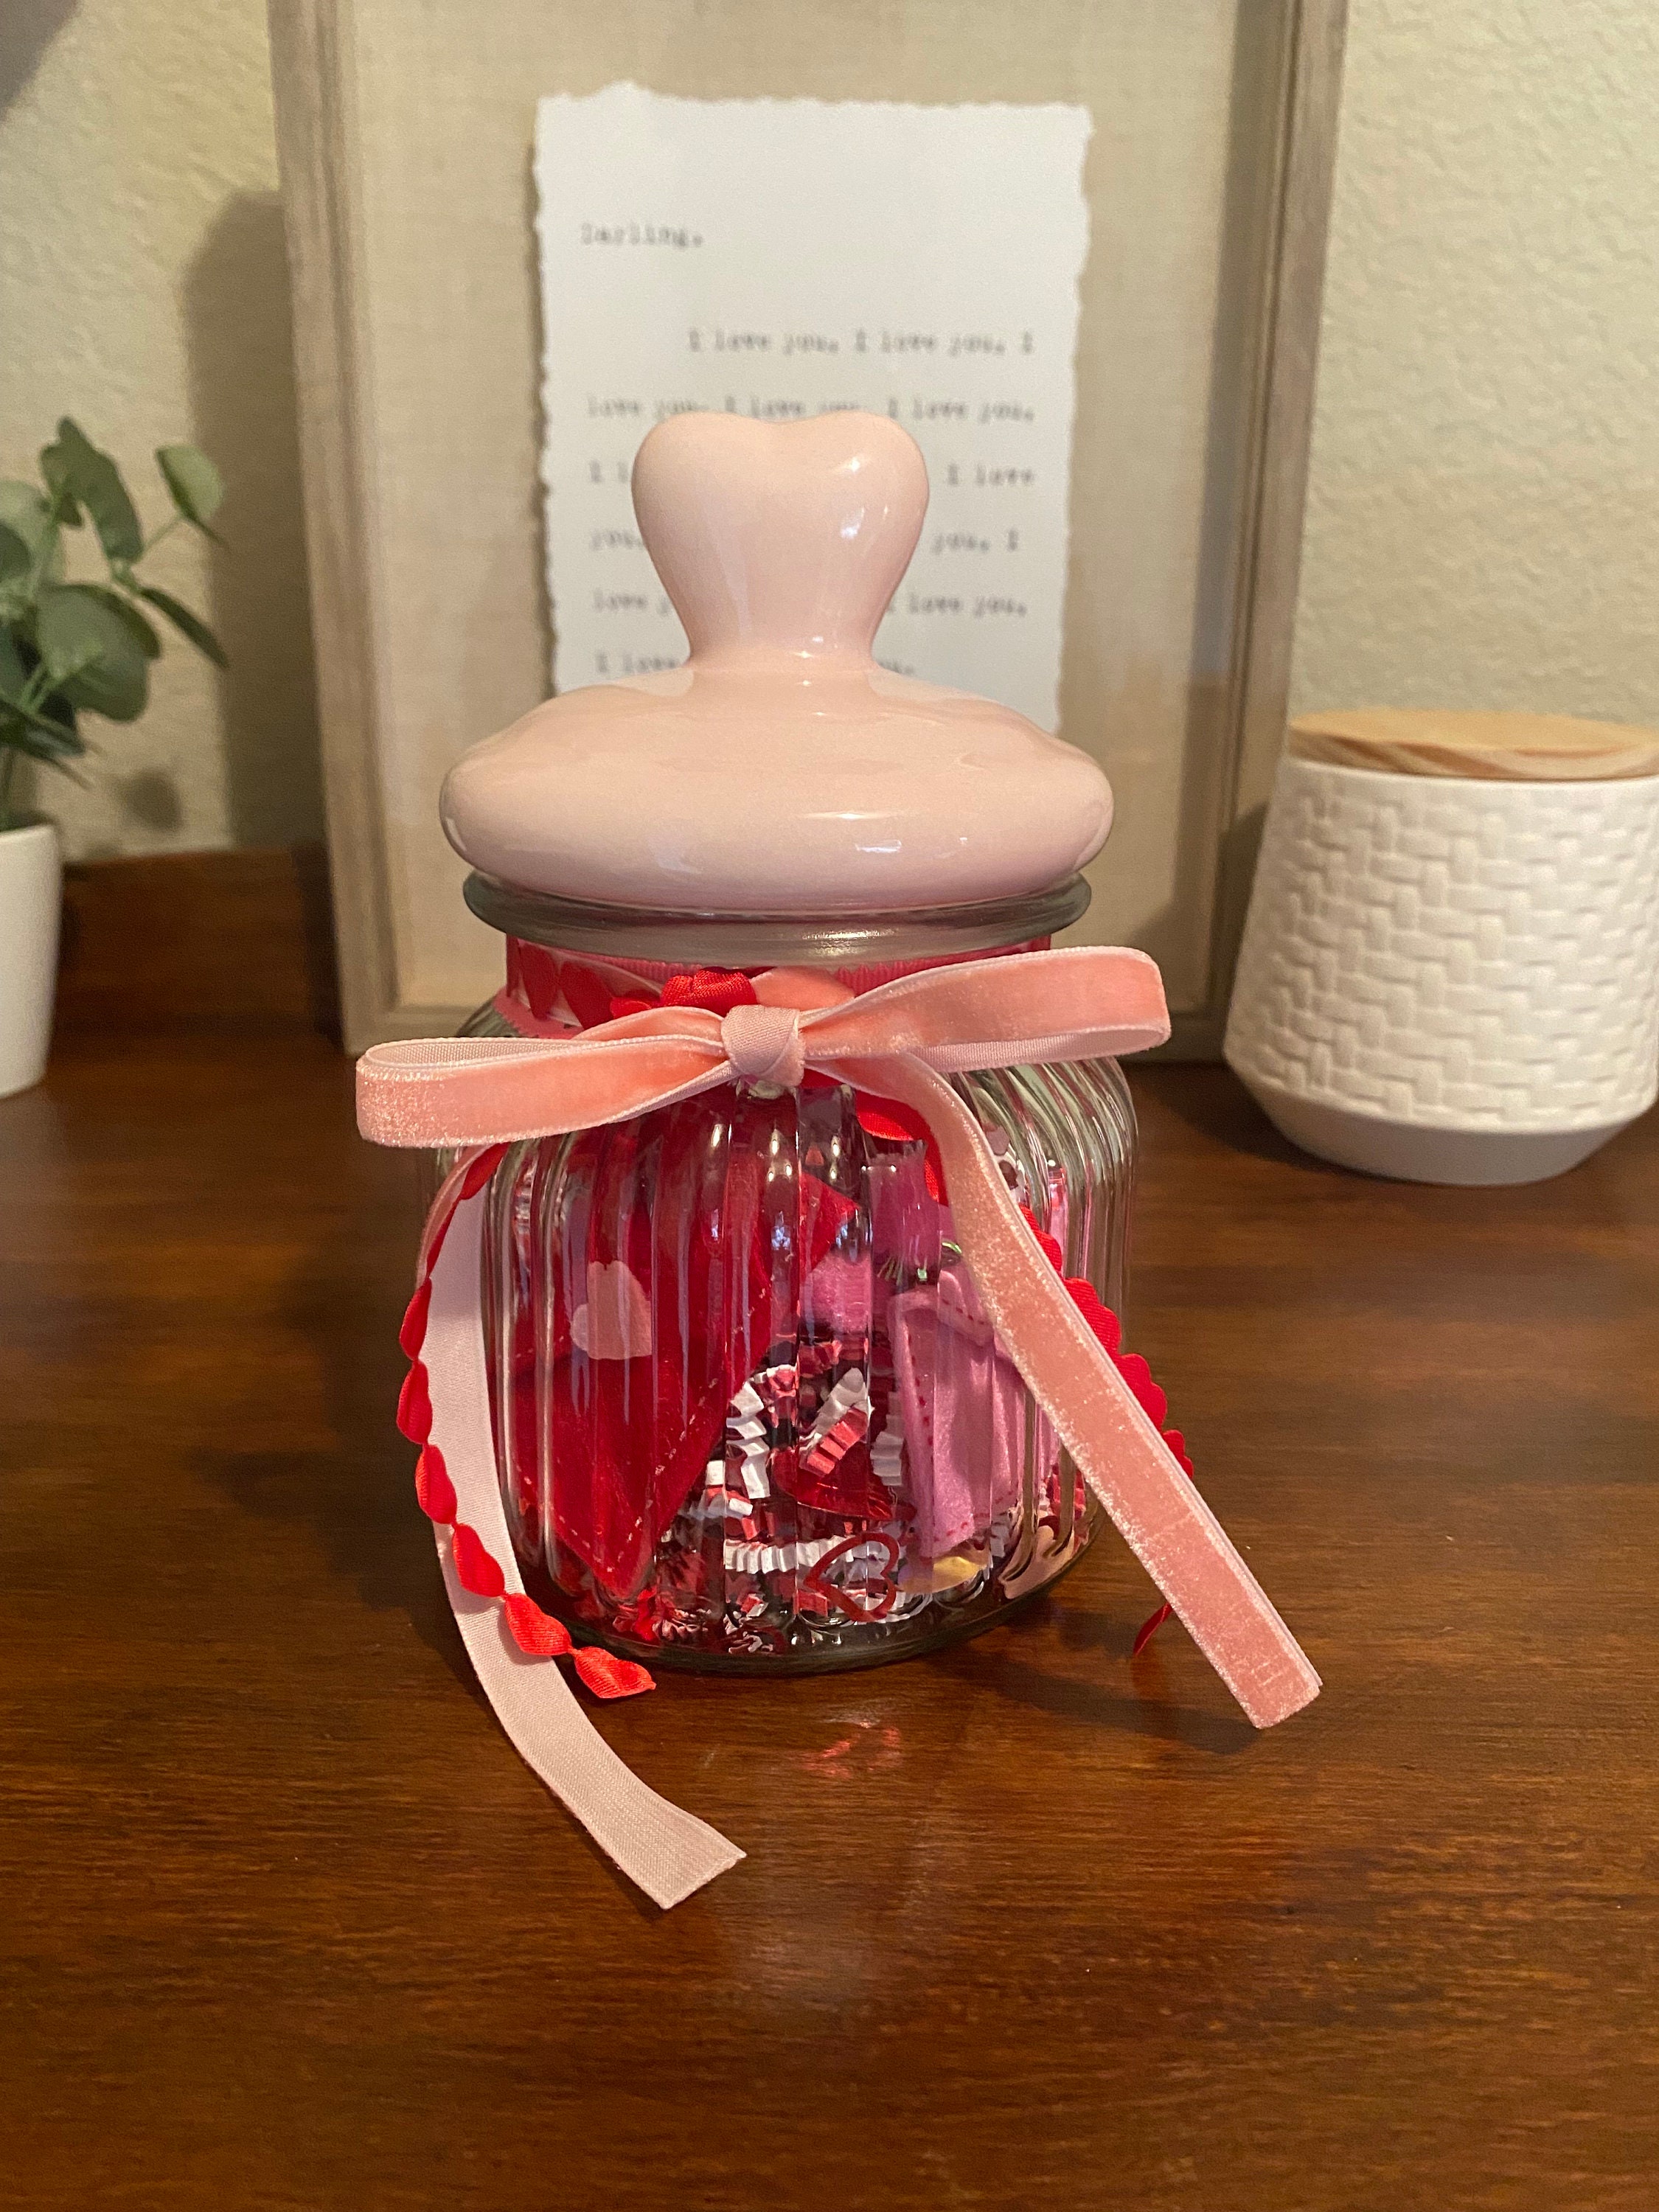 Valentines Glass Container with Heart Lid, 4.33x6.490-in.